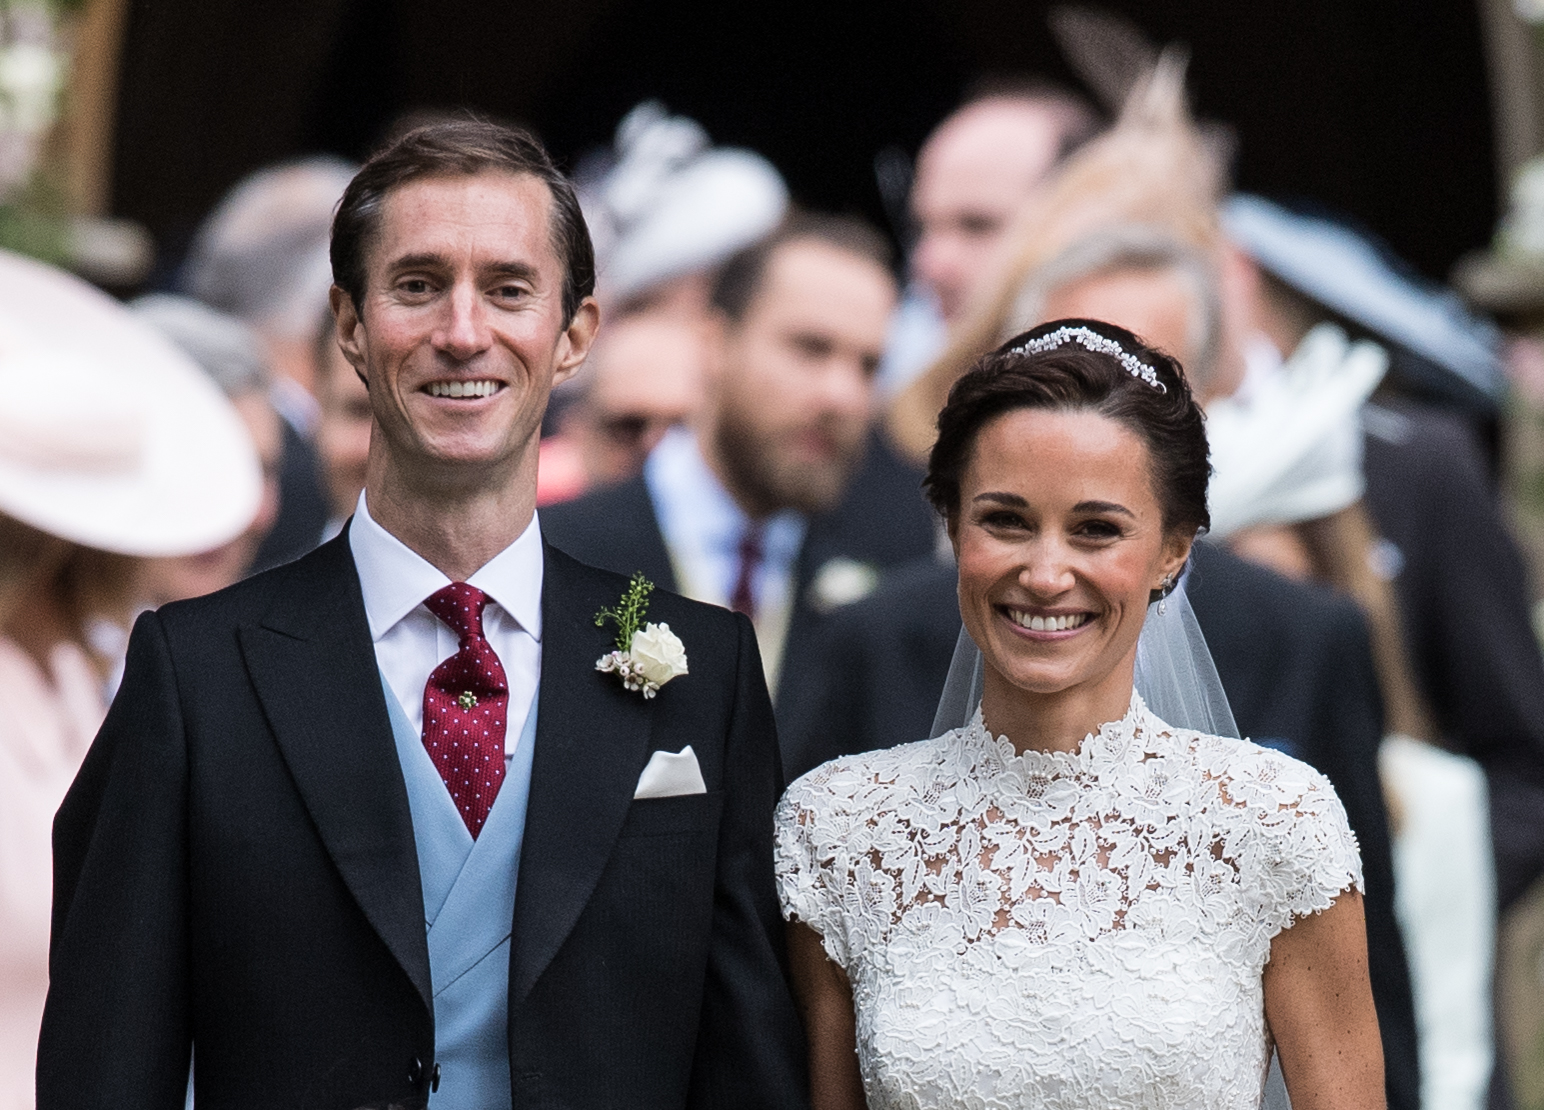 The wedding of Pippa Middleton and James Matthews wedding day makeup fears